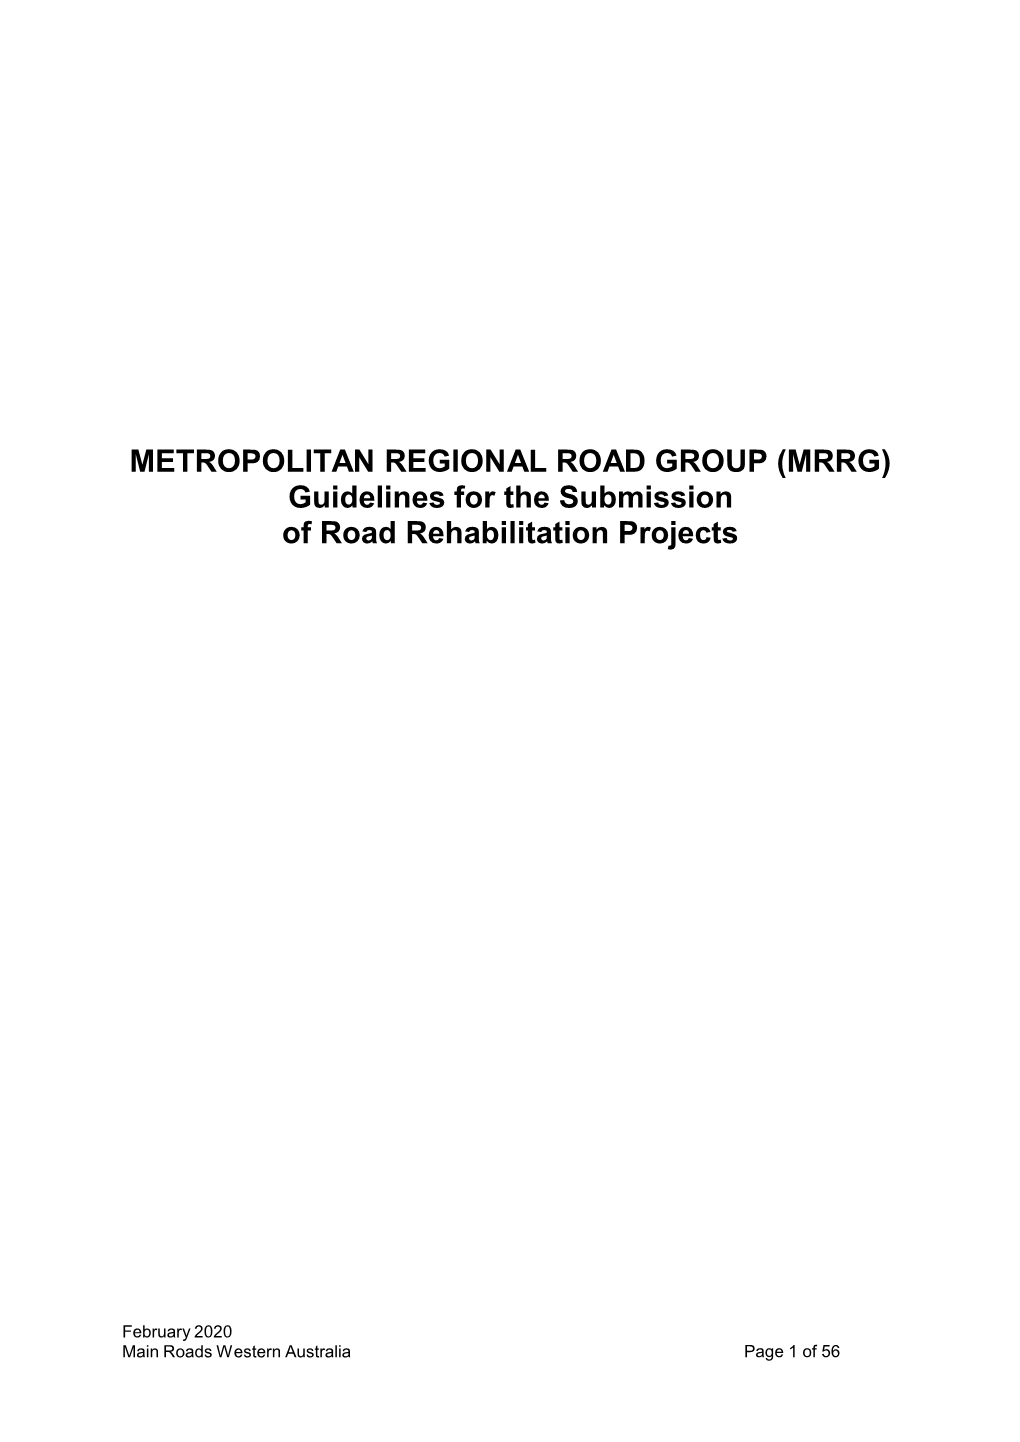 (MRRG) Guidelines for the Submission of Road Rehabilitation Projects